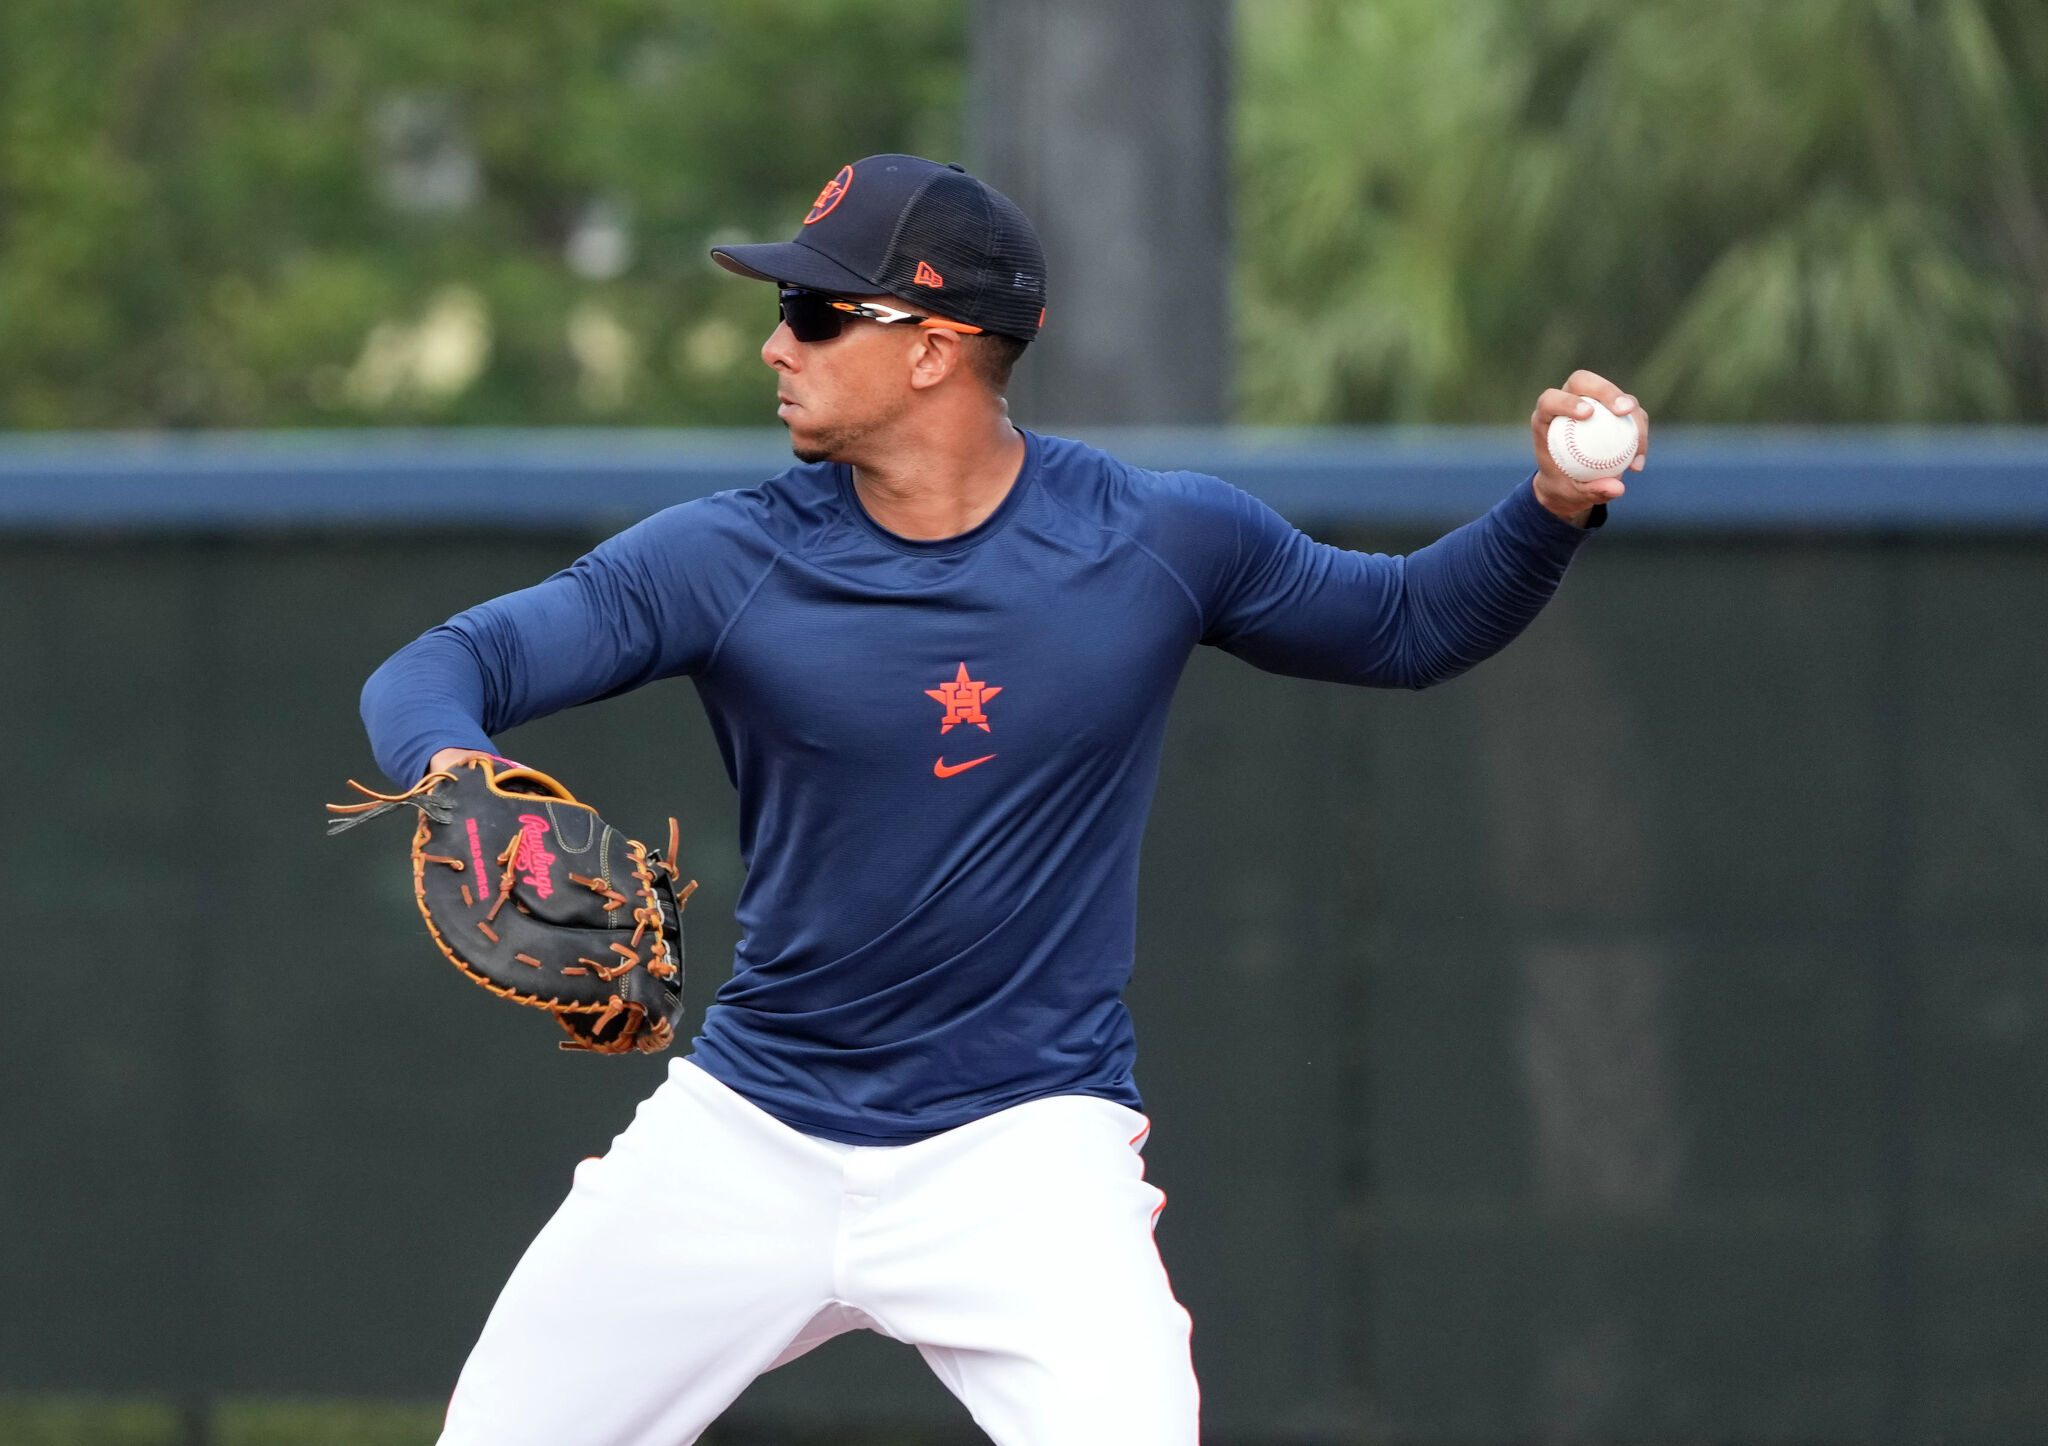 Astros OF Michael Brantley working back from shoulder surgery, to